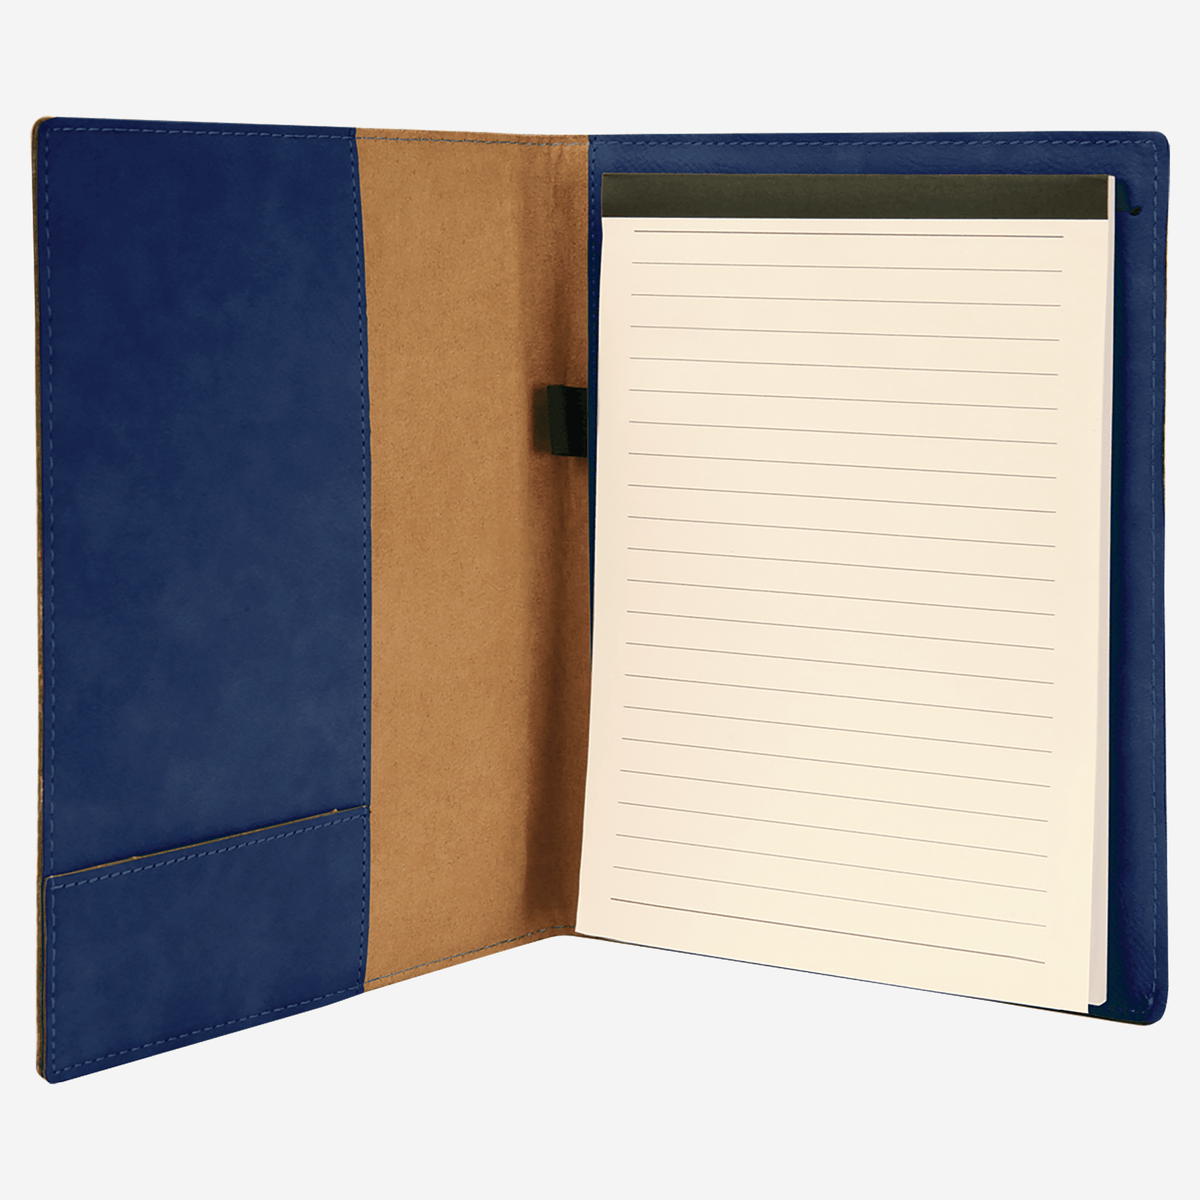 7" x 9" Laserable Navy Blue Leatherette Small Portfolio with Notepad open view with pocket on left and notepad on right